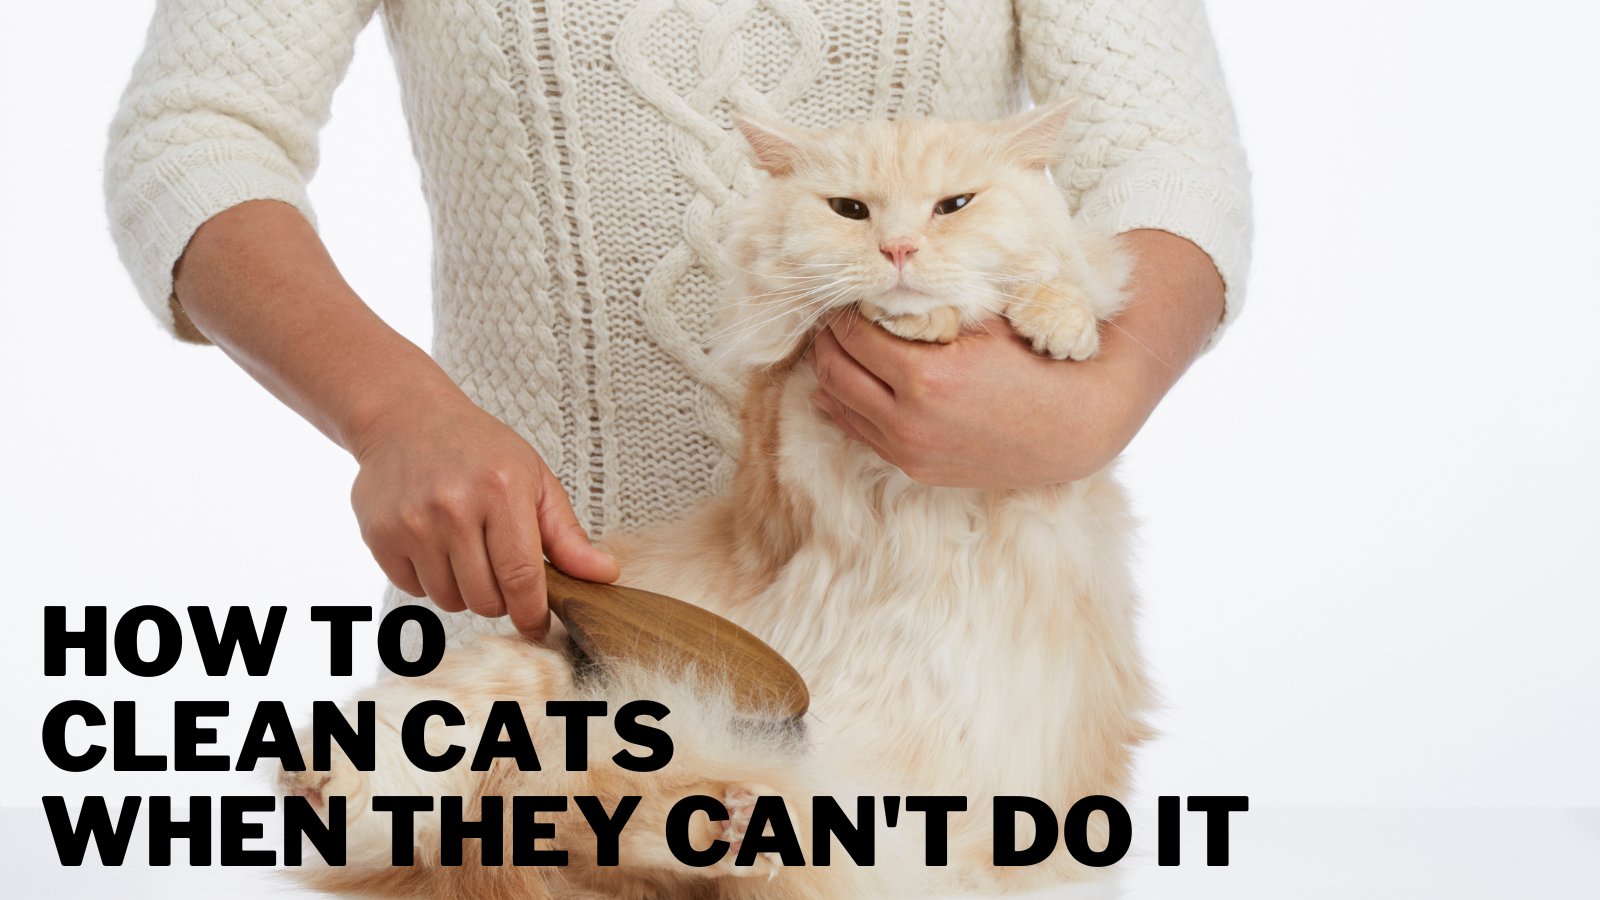 How To Clean Cats When They Can't Do It